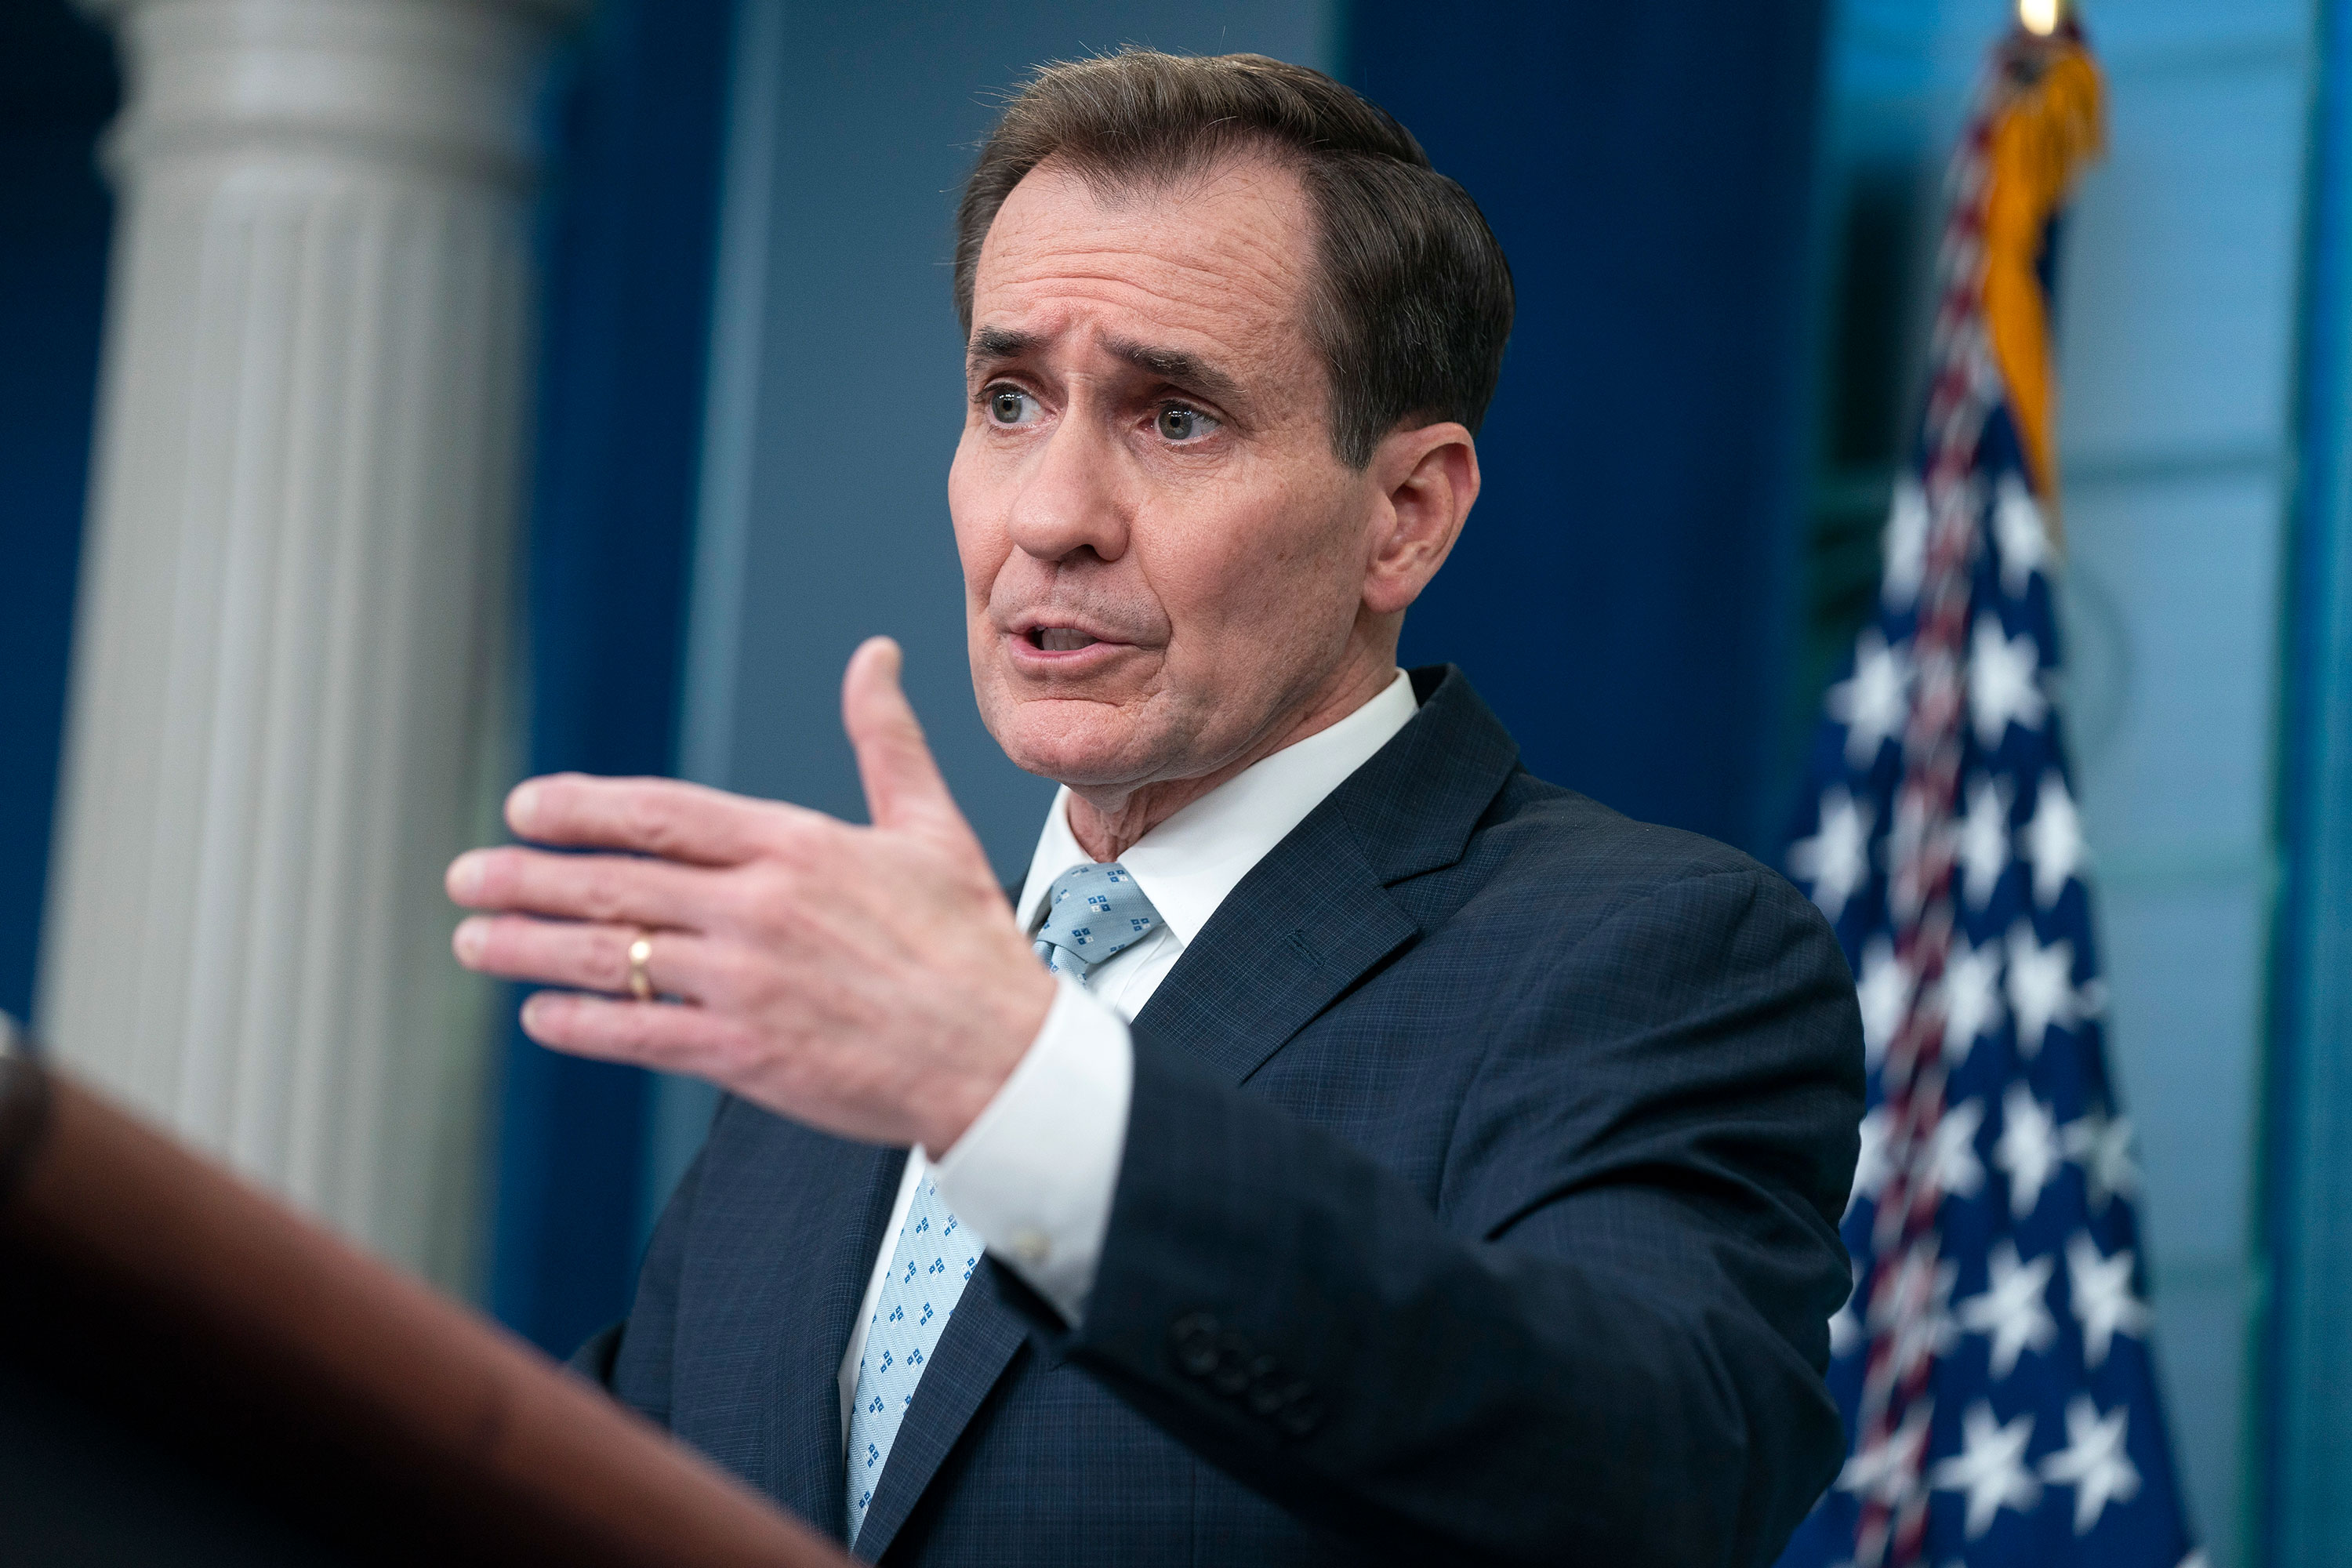 National Security Council spokesperson John Kirby speaks during a press briefing at the White House on February 13.